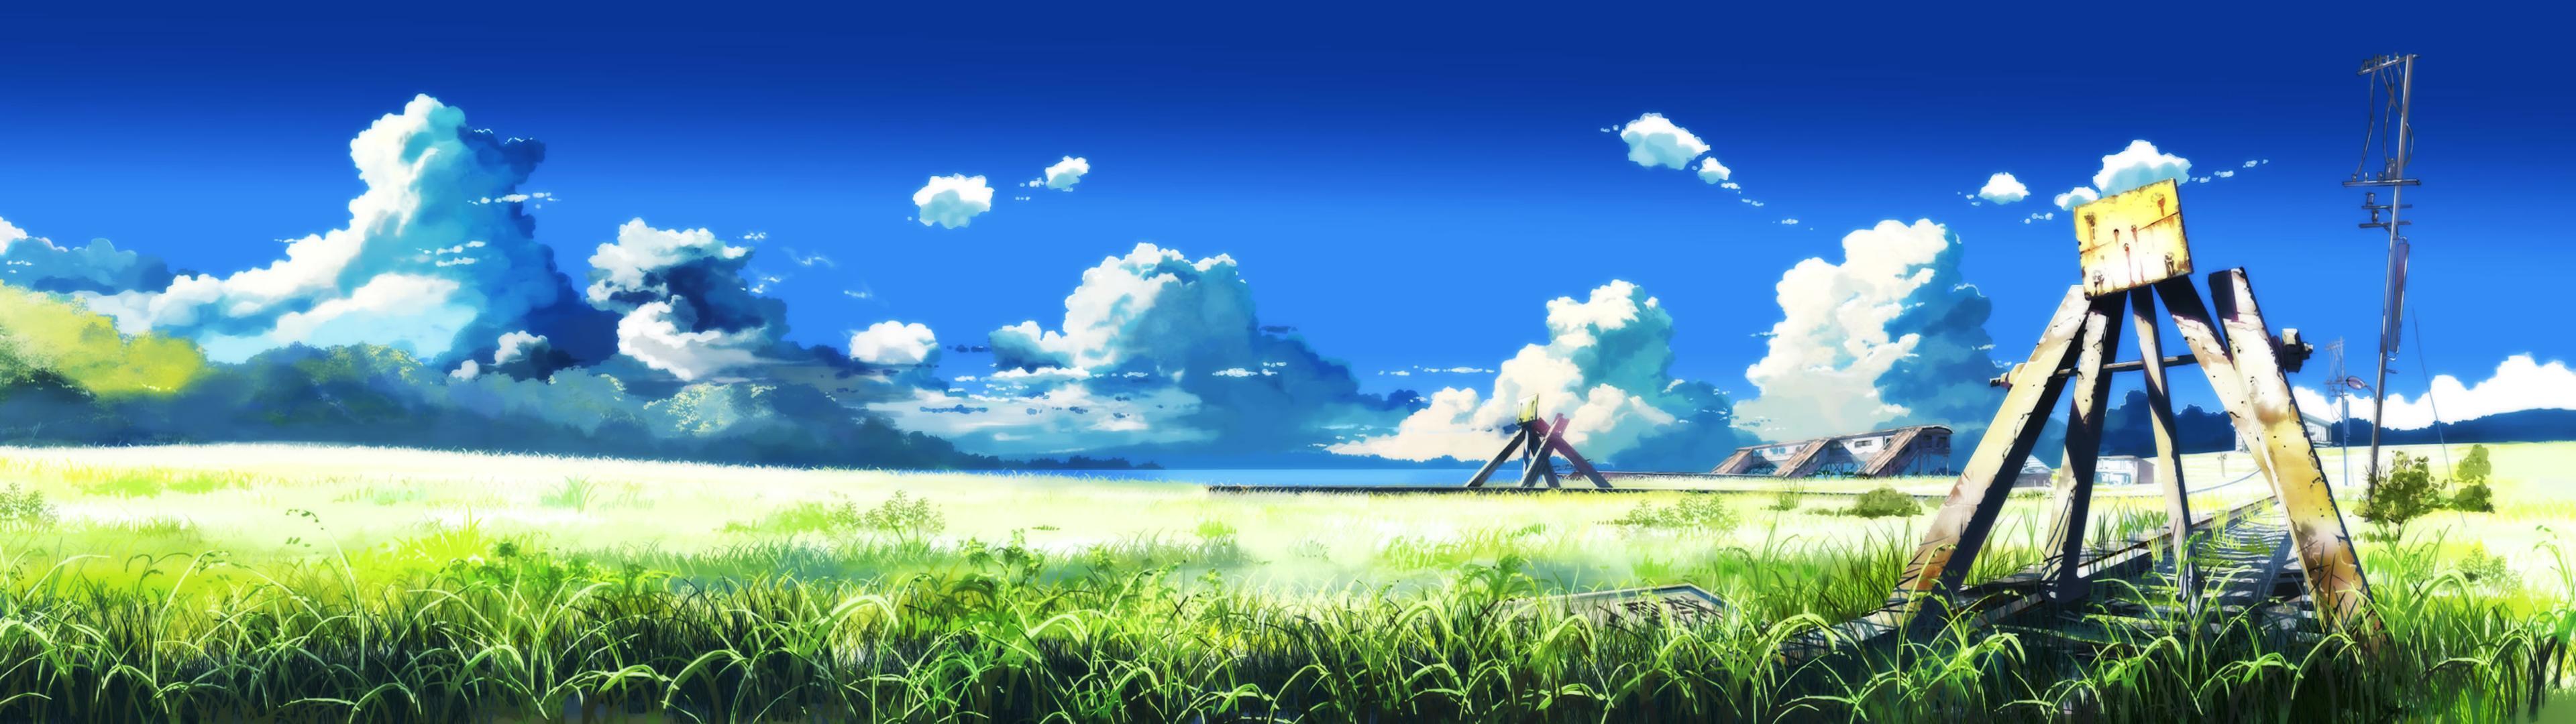 3840 X 1080 Anime Wallpapers - Top Free 3840 X 1080 Anime Backgrounds